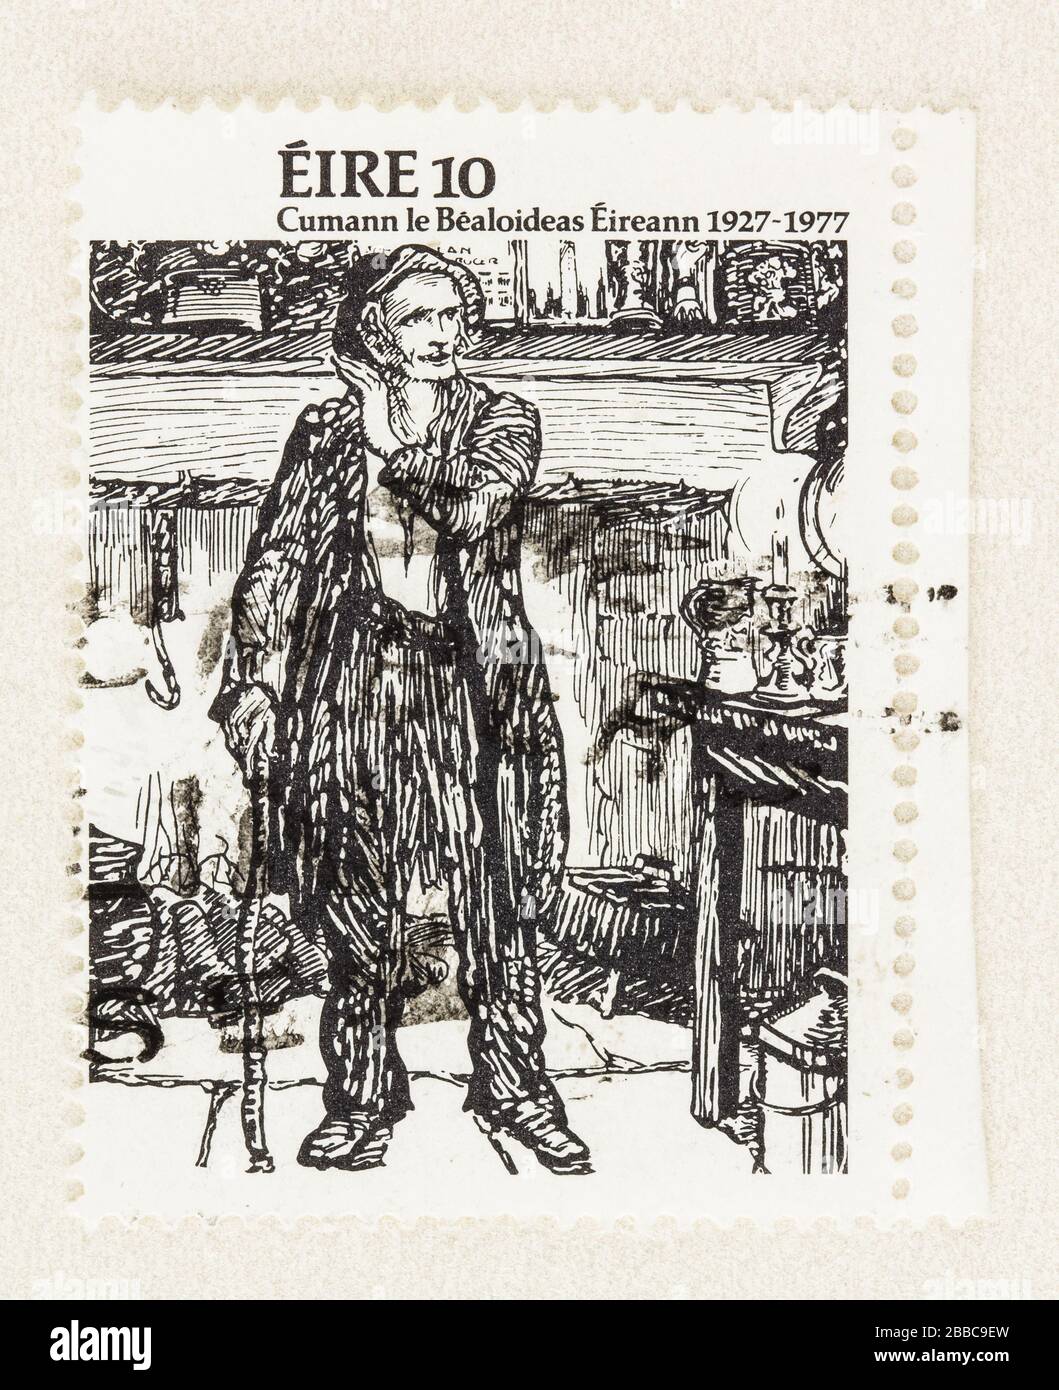 SEATTLE WASHINGTON - March 29, 2020: Close up of postage stamp commemorating Irish Folklore. Stamp with drawing of The Shanachie, the Ballad Singer. Stock Photo